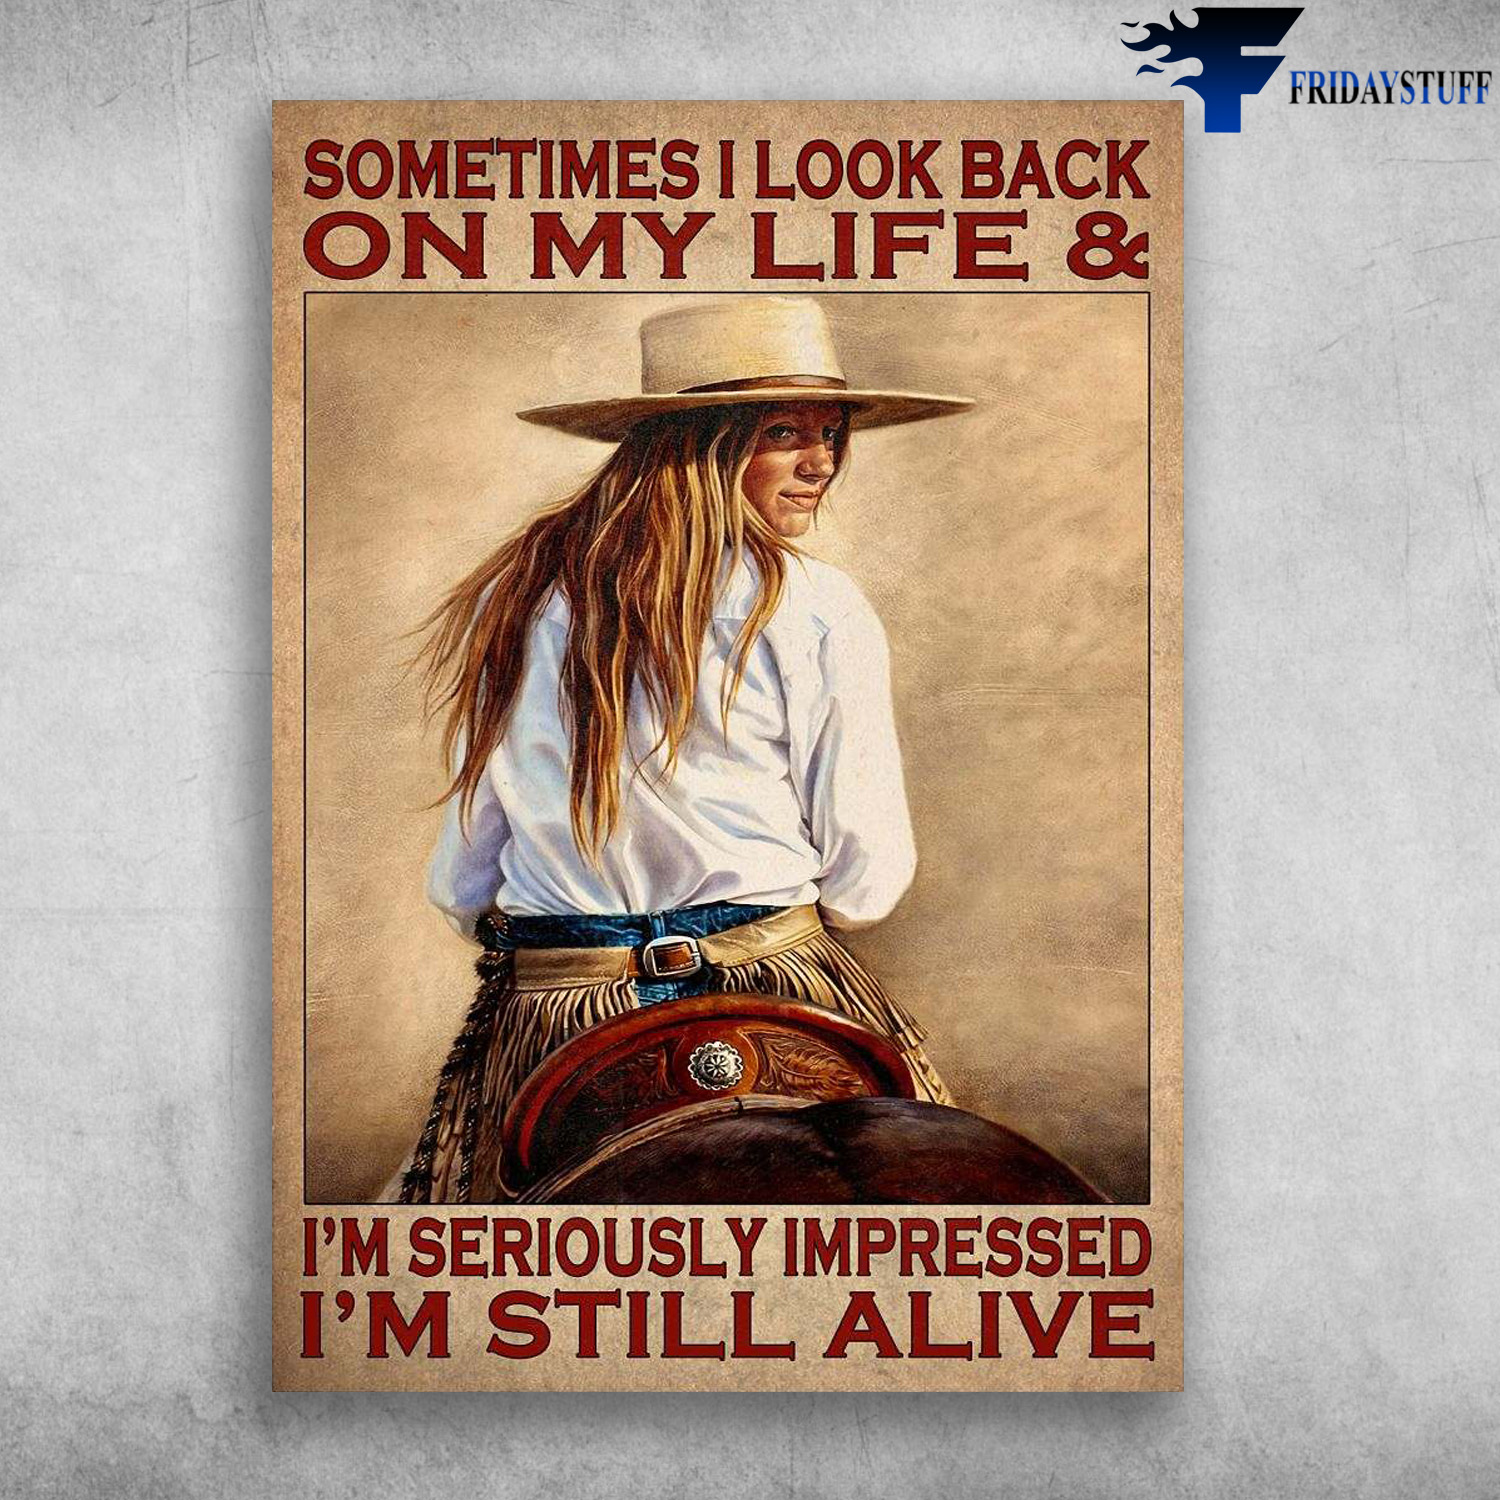 Cowgirl Riding - Sometines I Look Back, On My Life And, I'm Seriously Impressed, I'm Still Alive